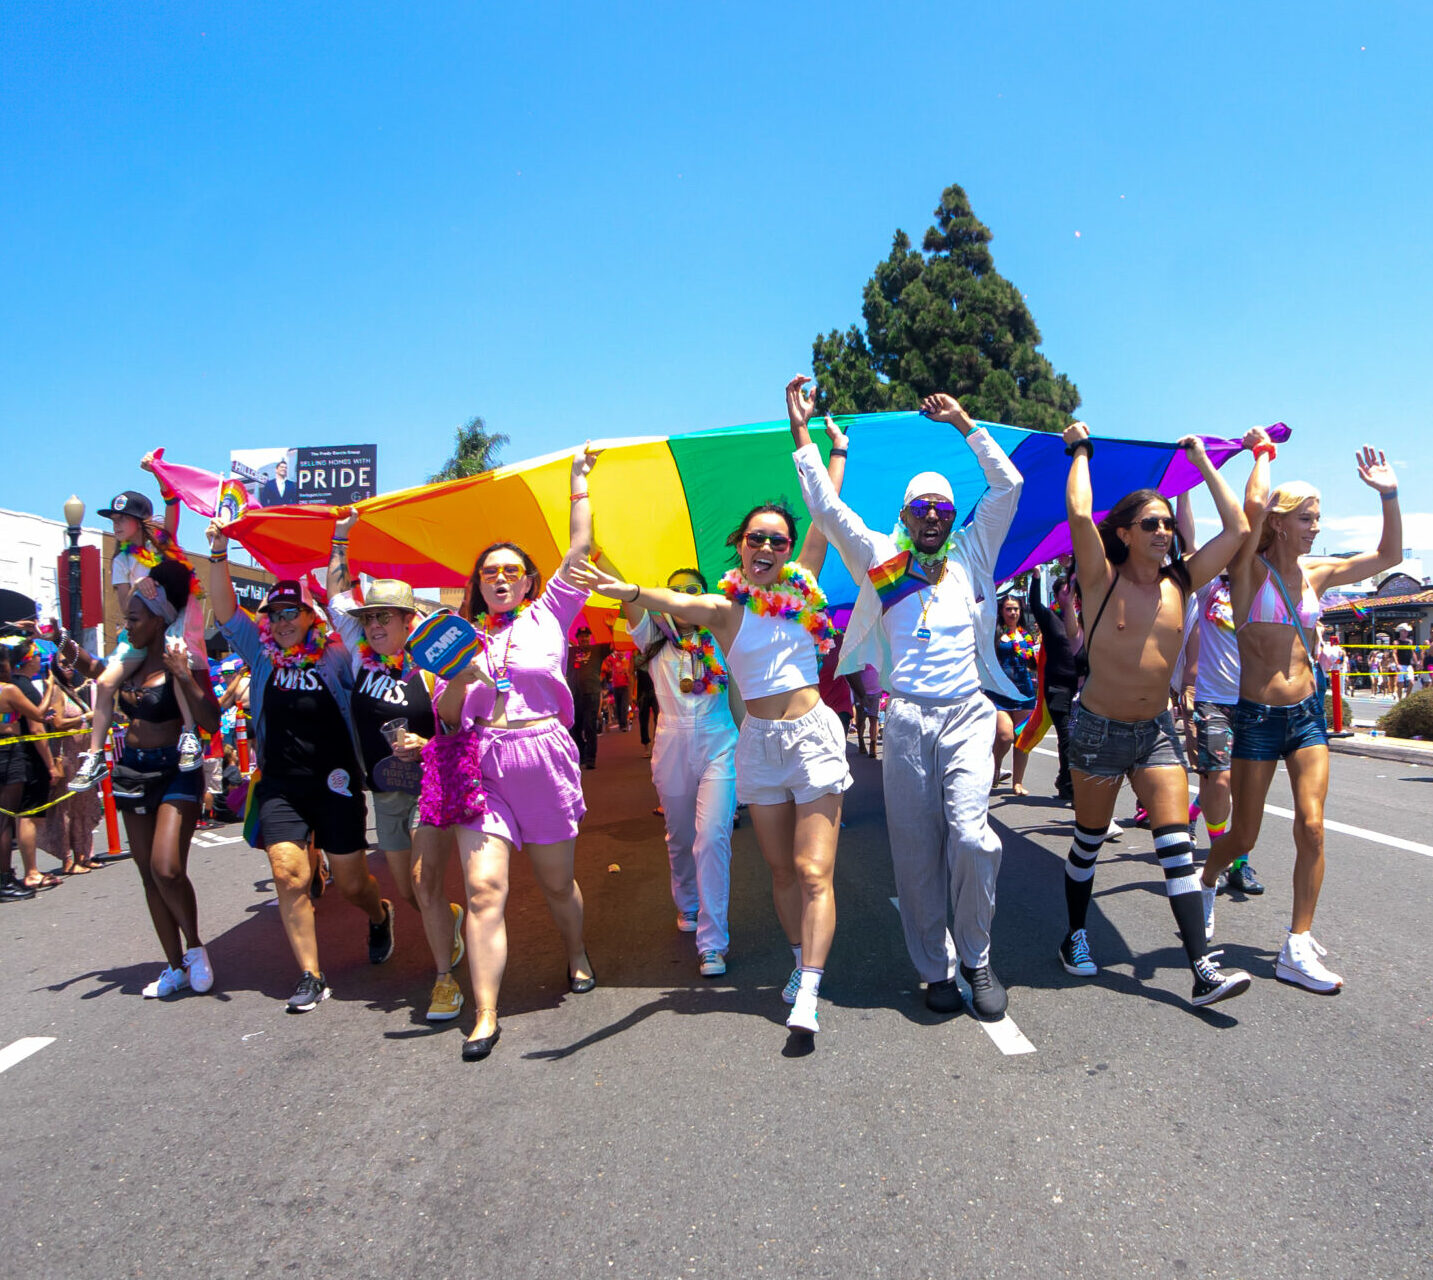 Parade attendees holding giant rainbow flag